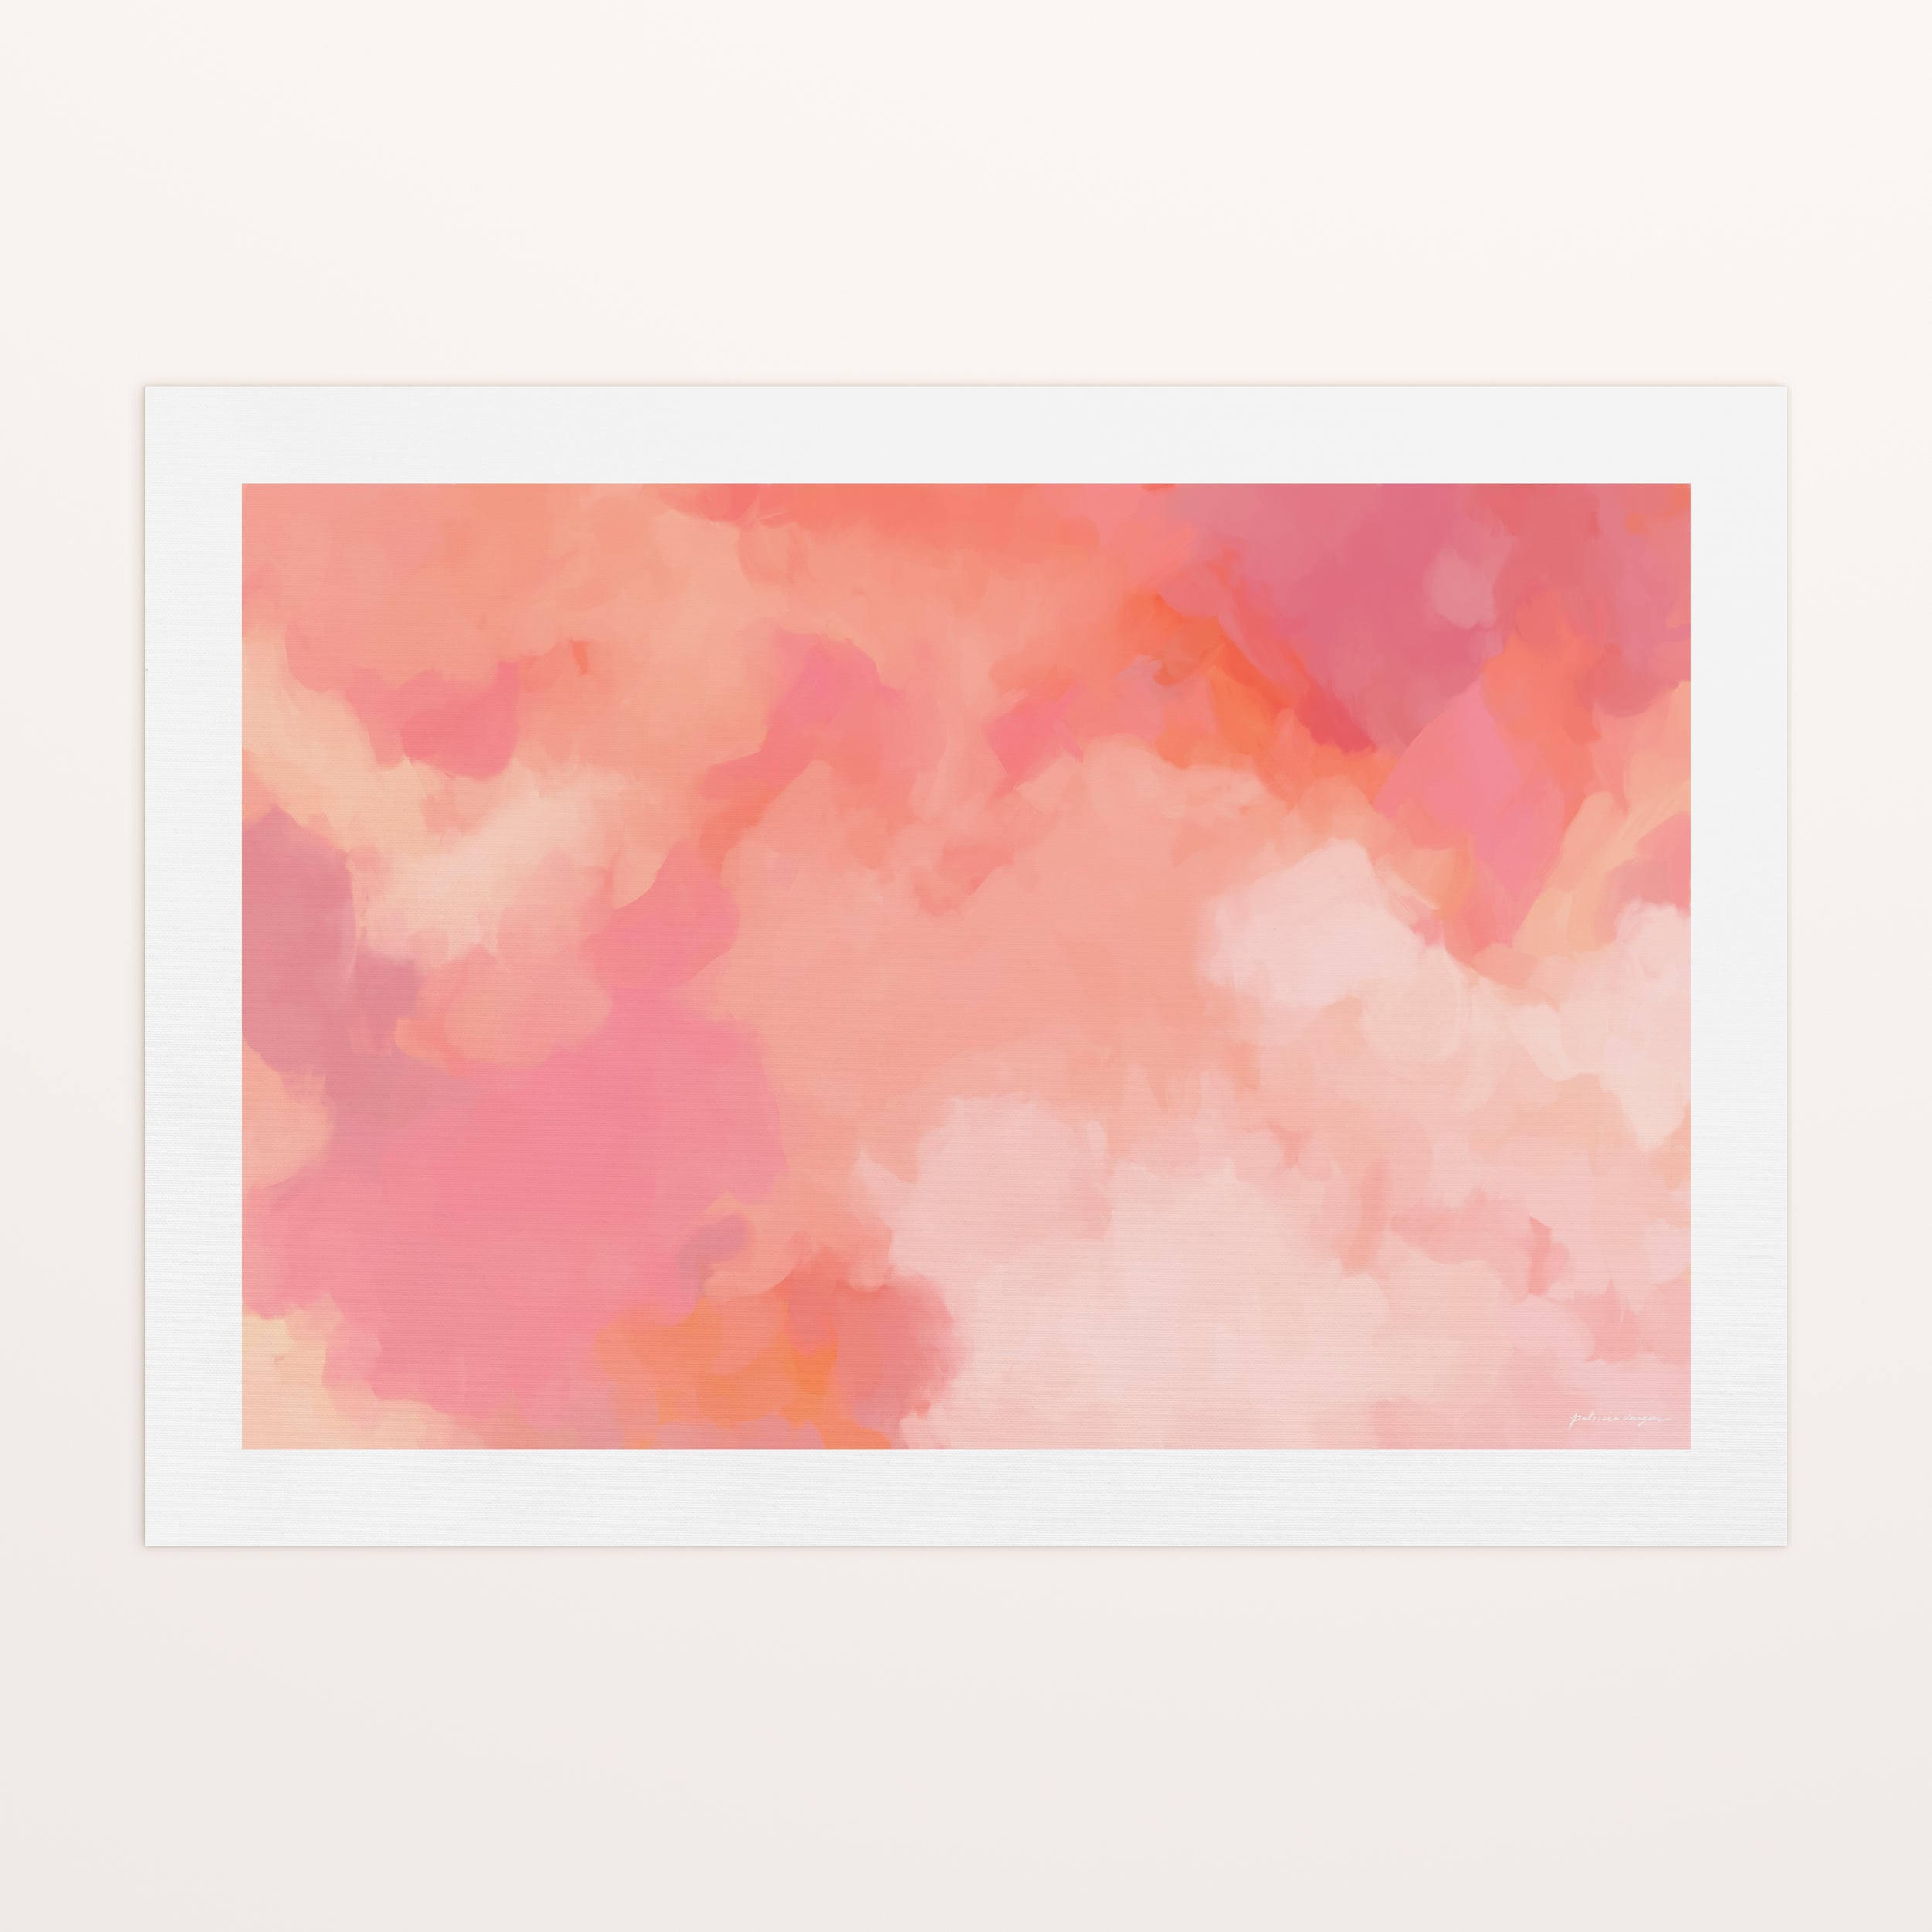 Forever Pink, pink and orange colorful abstract canvas wall art print by Parima Studio